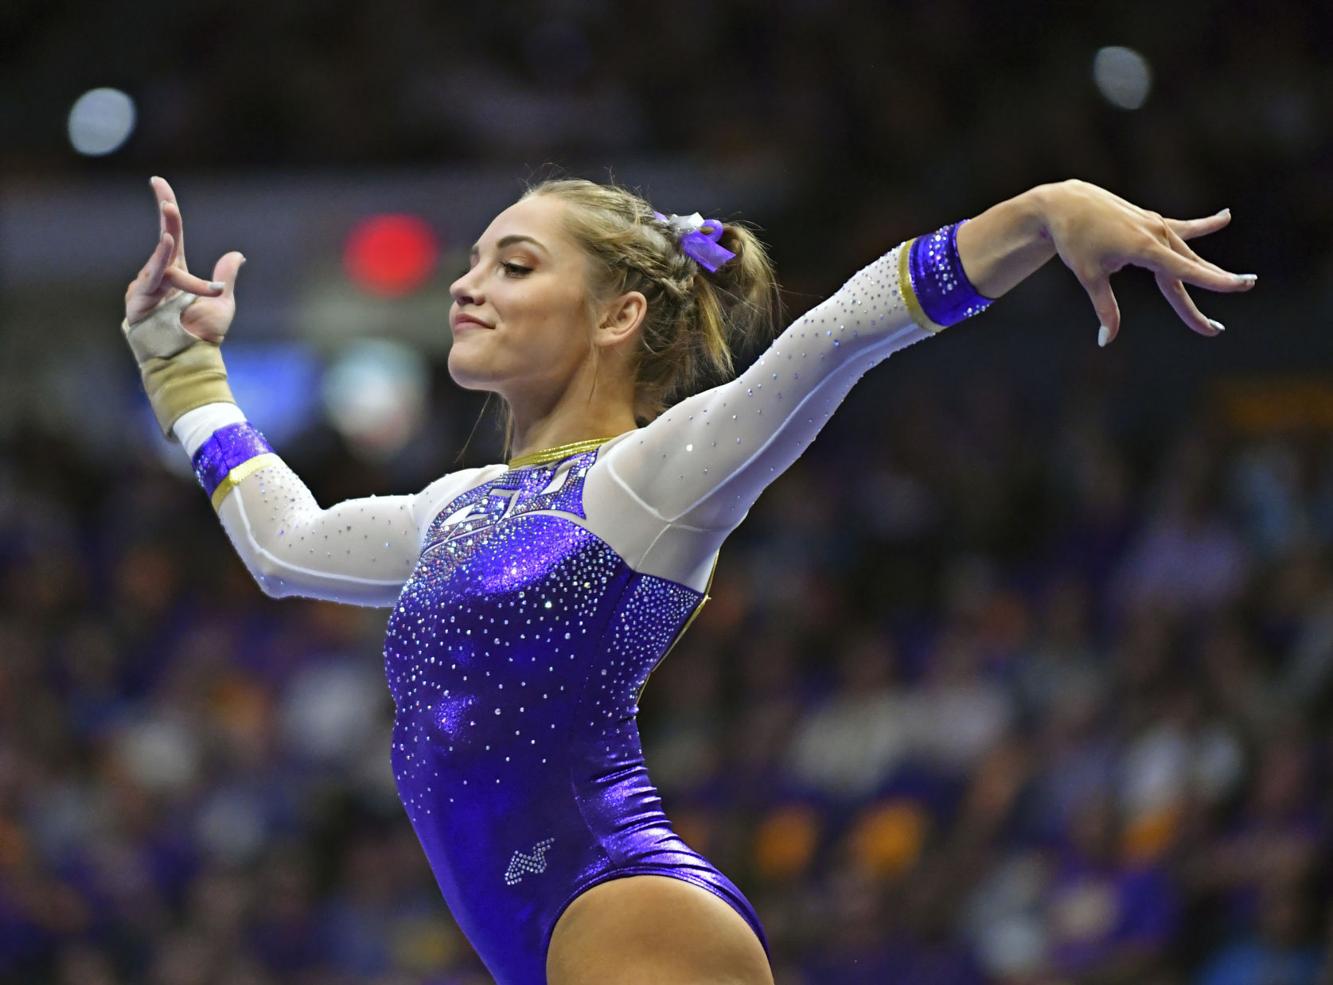 Tickets limited for LSU gymnastics this season, but are available for